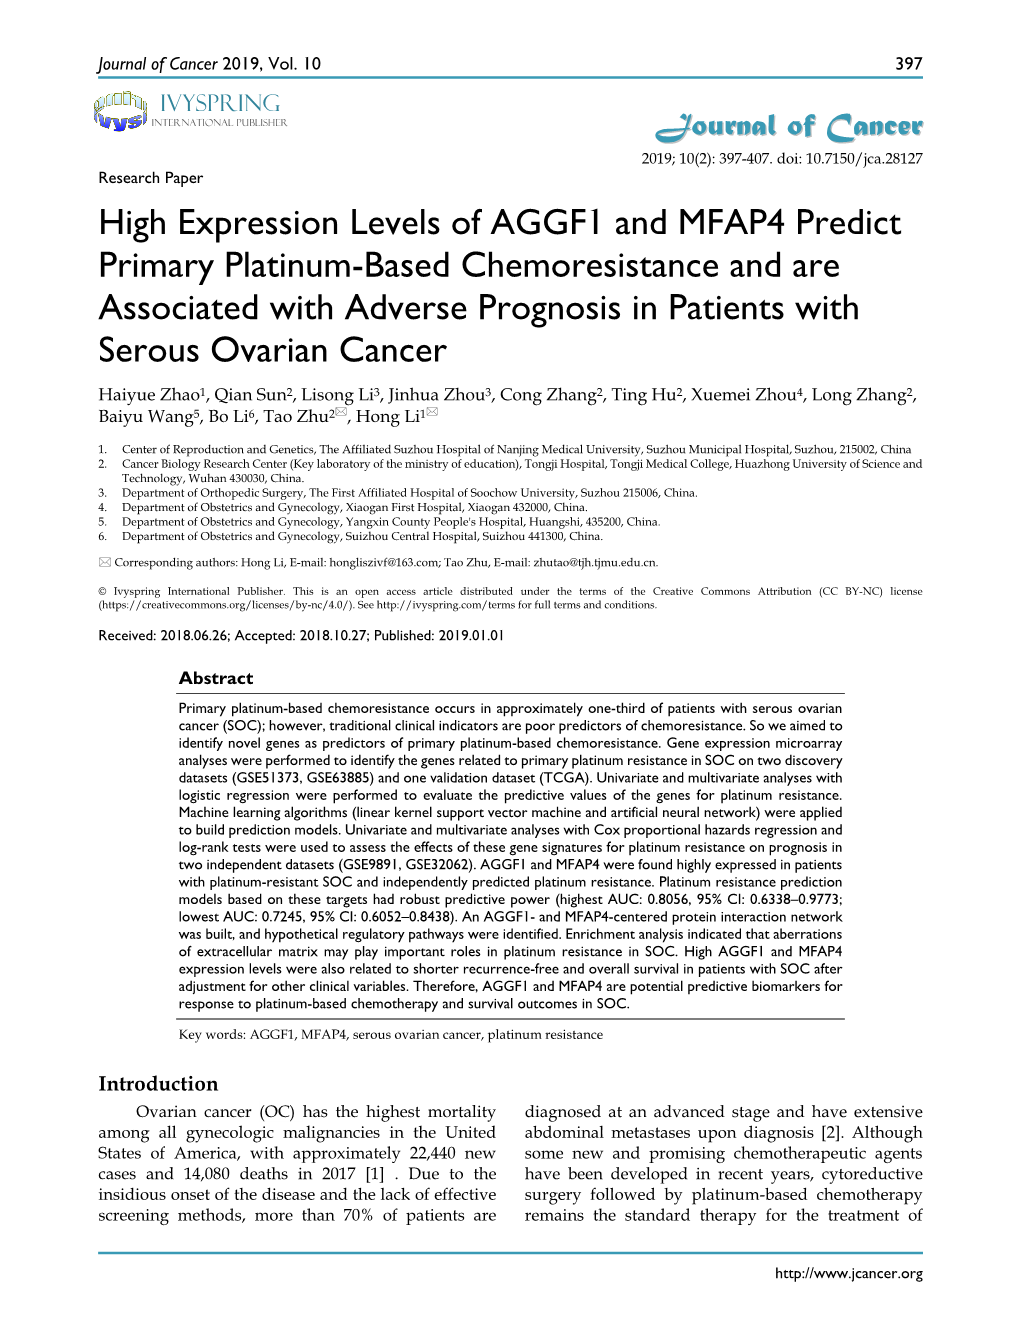 High Expression Levels of AGGF1 and MFAP4 Predict Primary Platinum